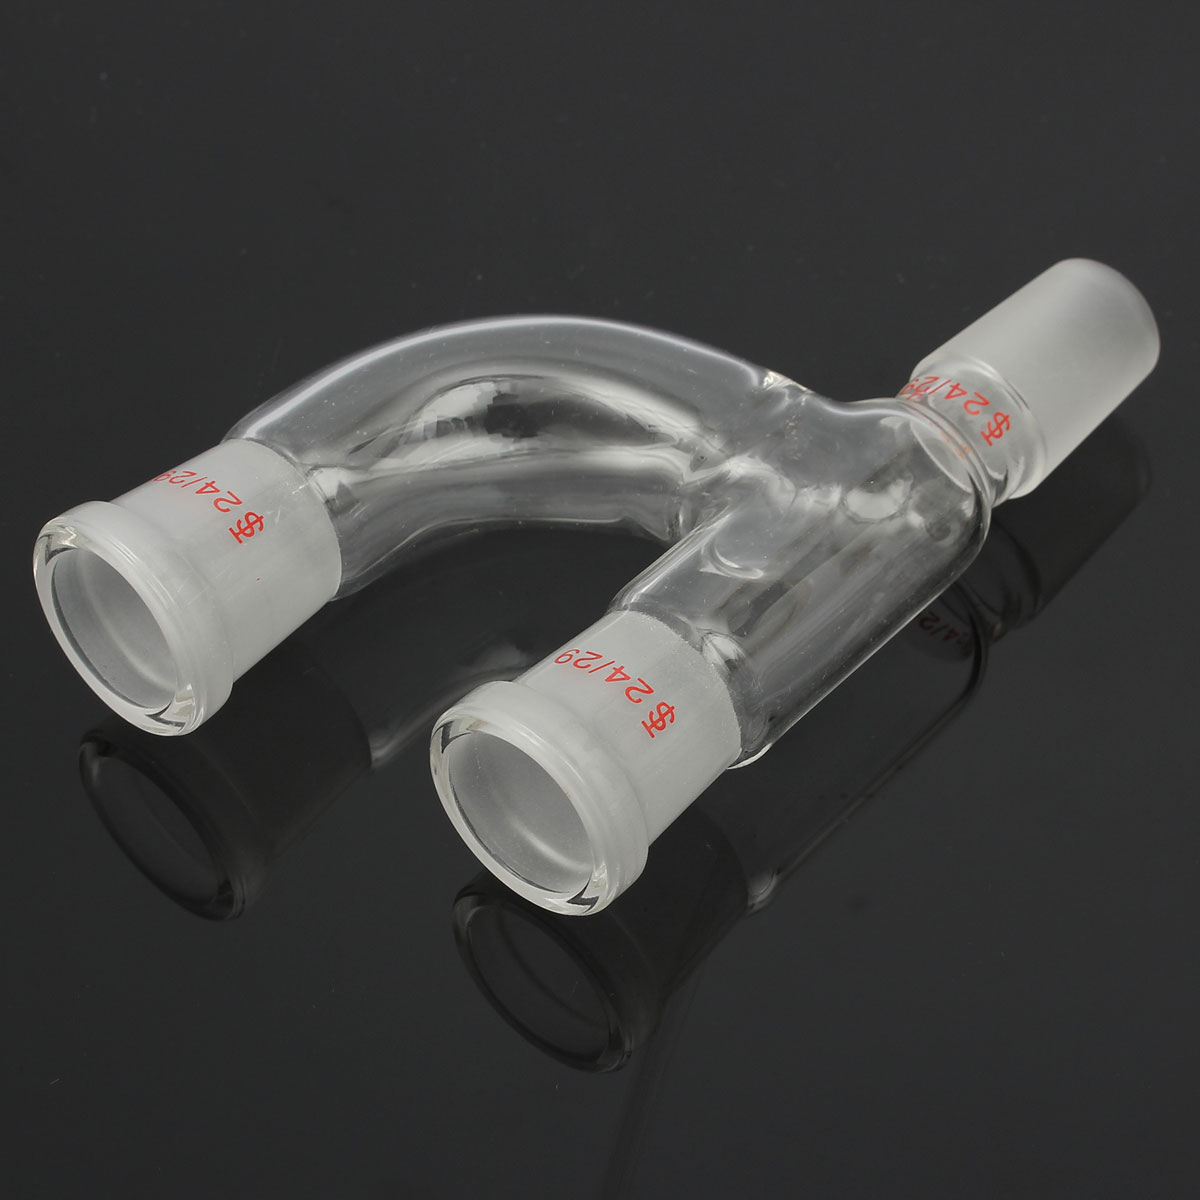 3-Way-Glass-Claisen-Adapter-w-2429-Joints-Borosilicate-Connecting-Adapter-Glassware-1036737-3